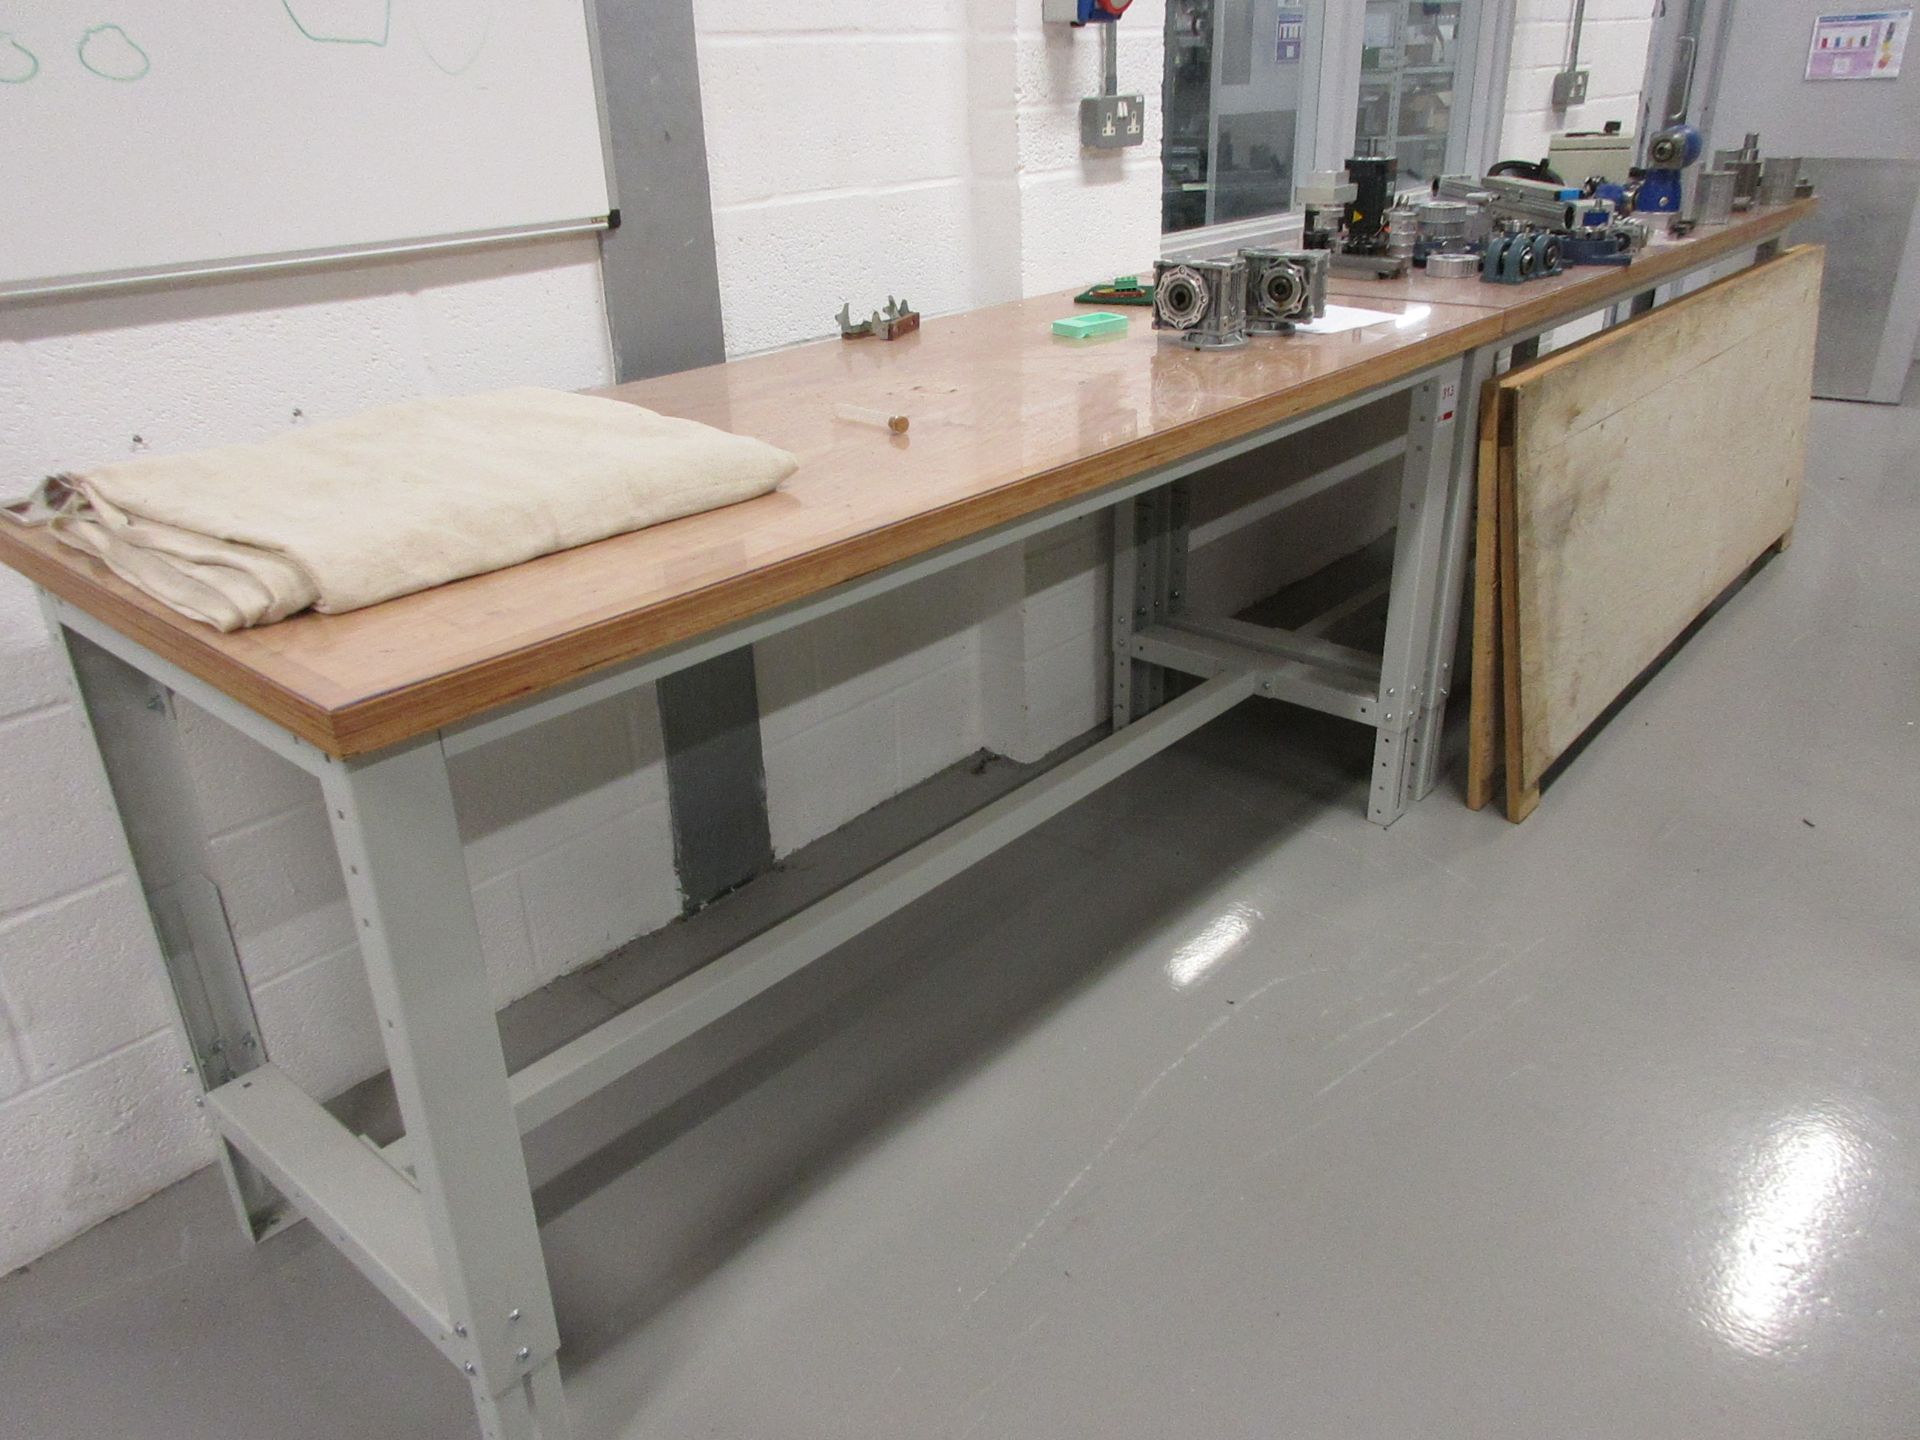 Two metal frame adjustable height workbenches, 2m x 750mm